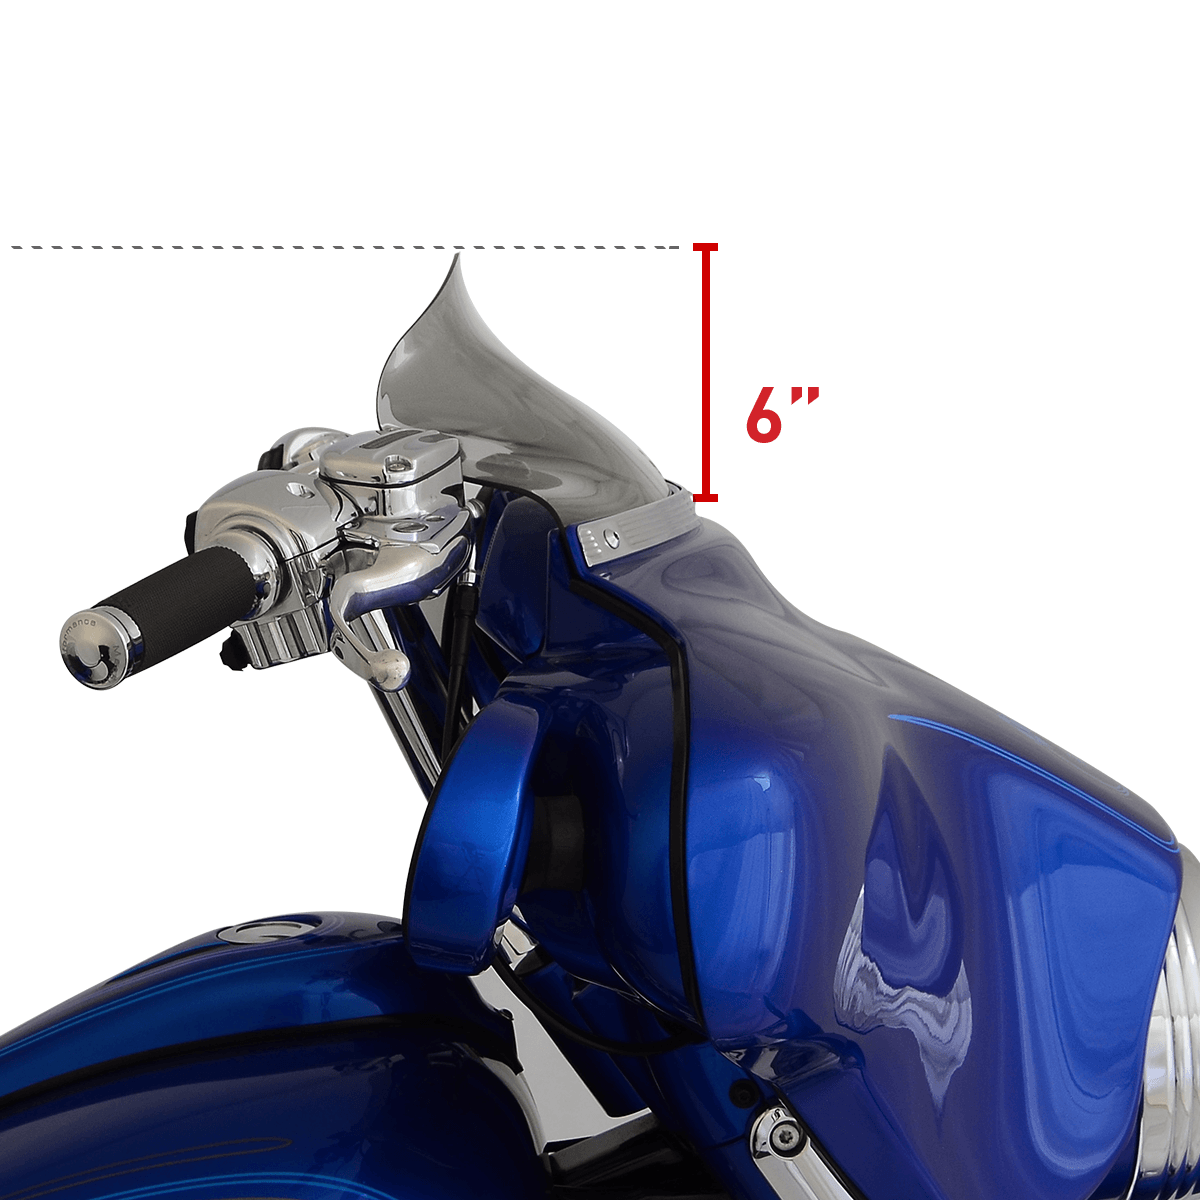 6.5" Tint Flare™ Windshield for Harley-Davidson 1996-2013 FLH Motorcycle Models(6.5" Tint)